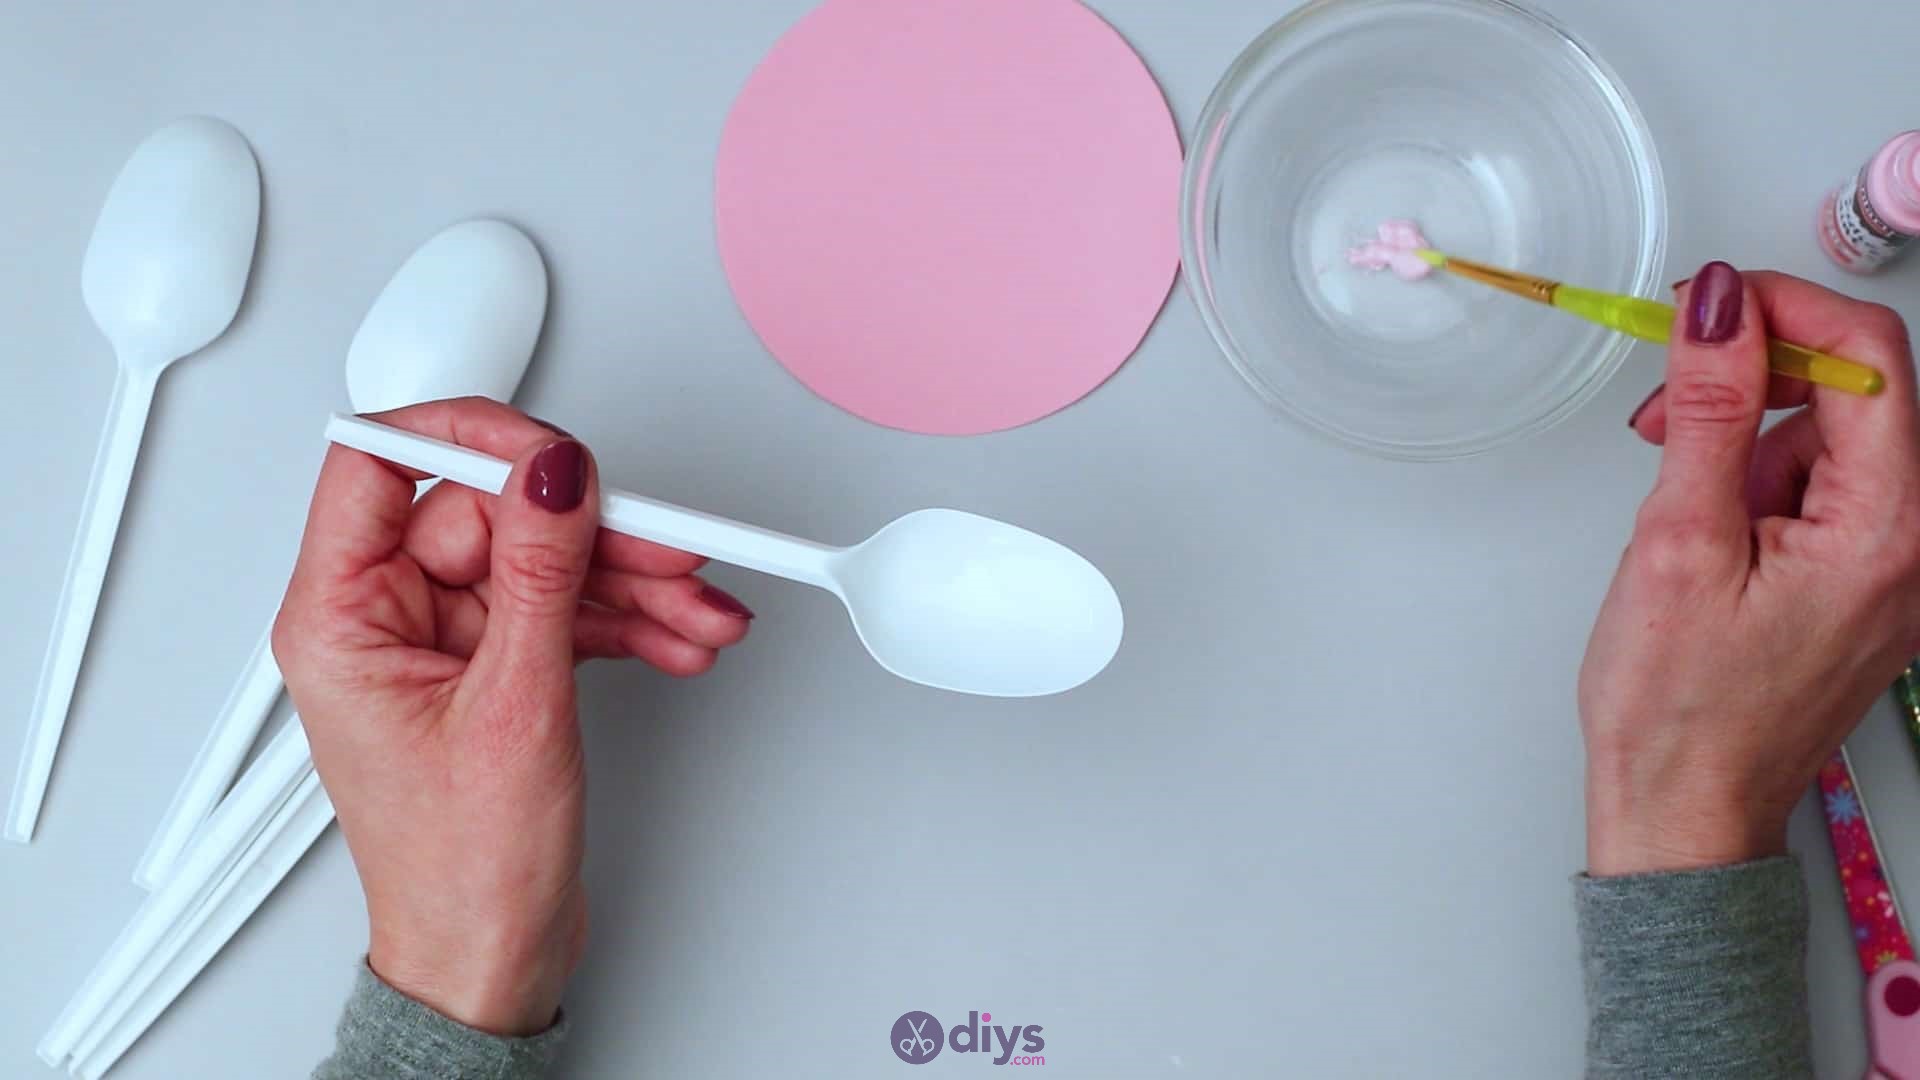 Diy plastic spoon candle holder step 3a